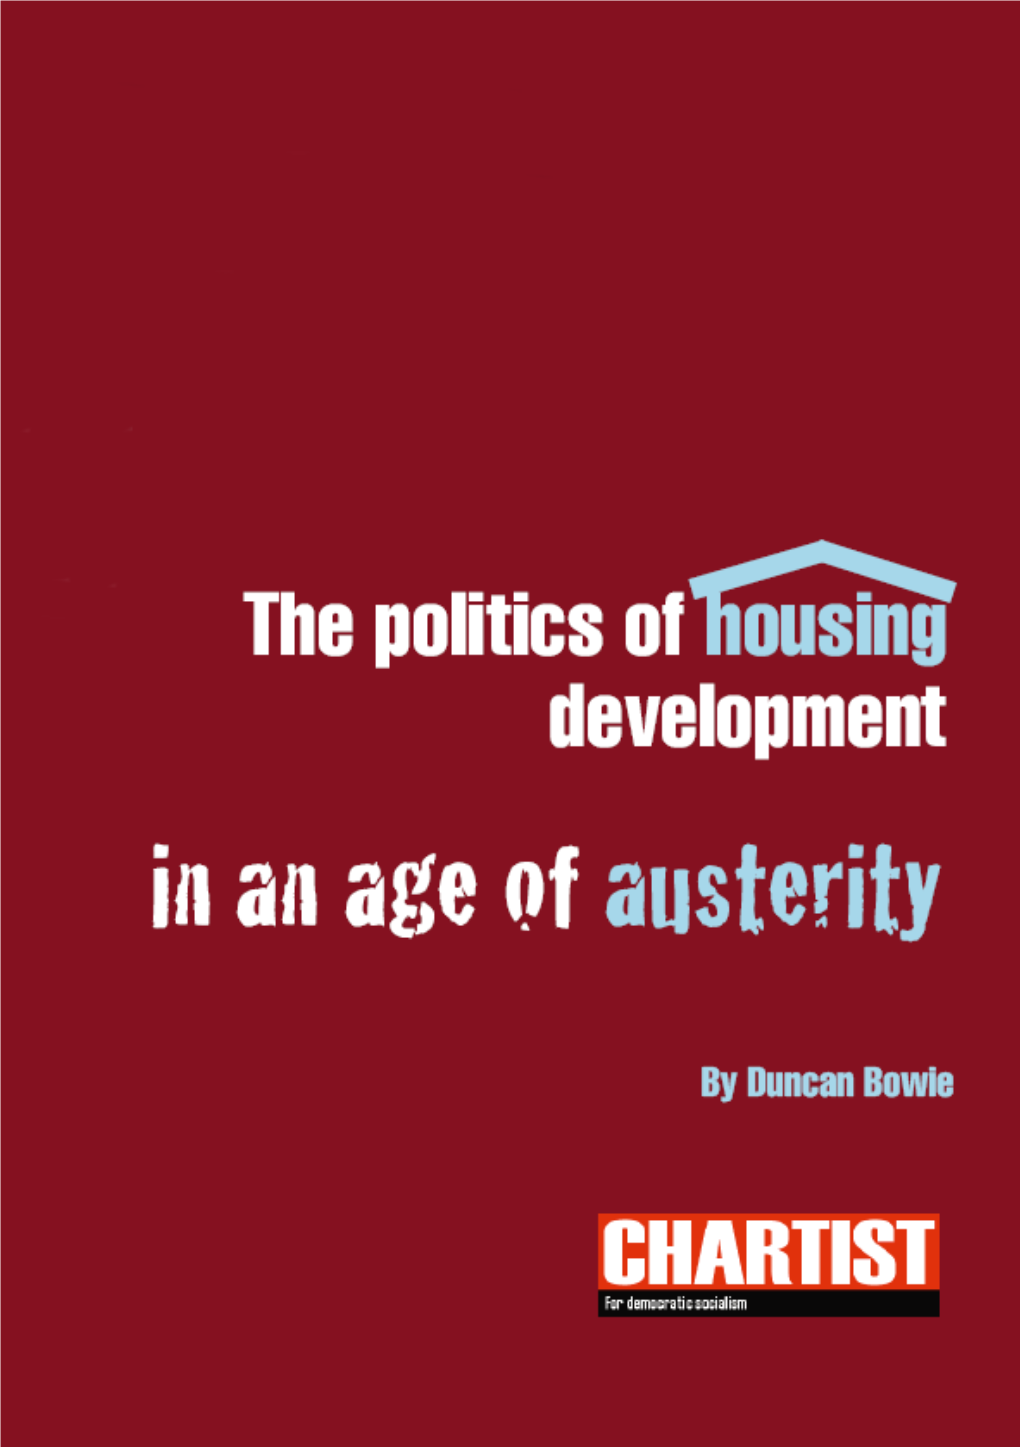 The Politics of Housing Development in an Age of Austerity